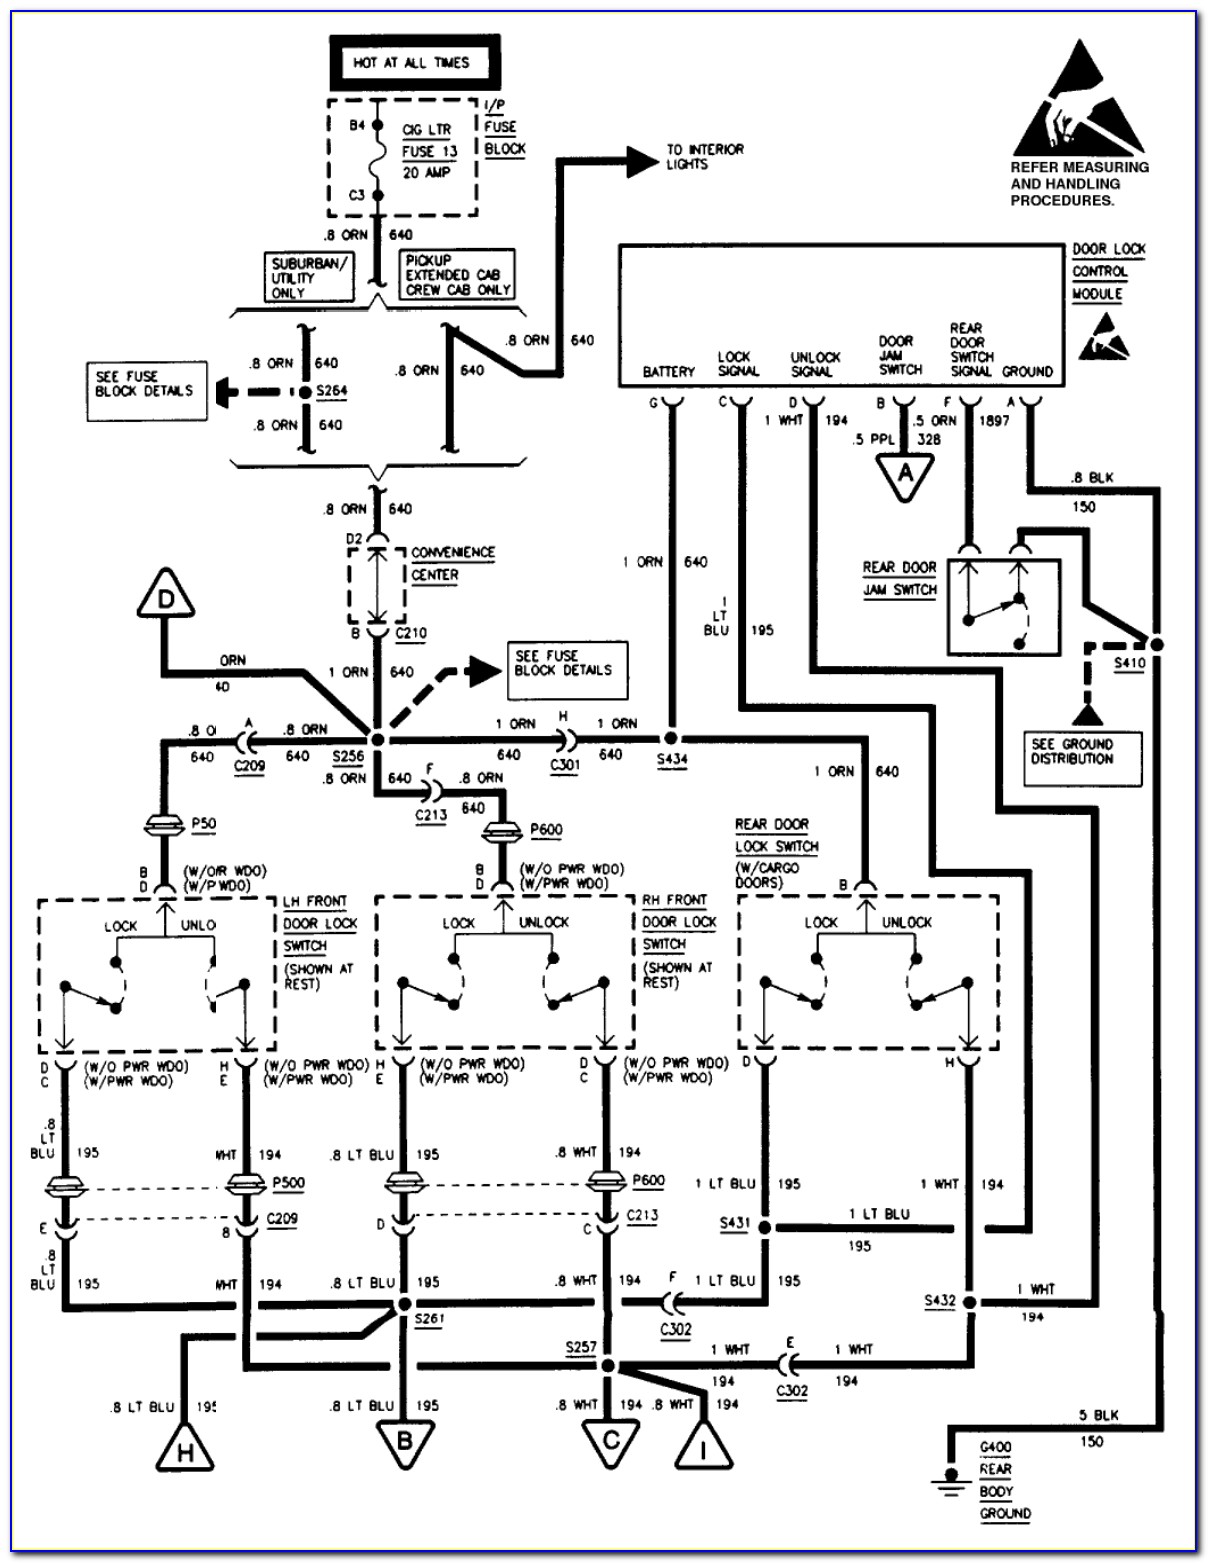 1997 Chevy Truck Ignition Switch Wiring Diagram